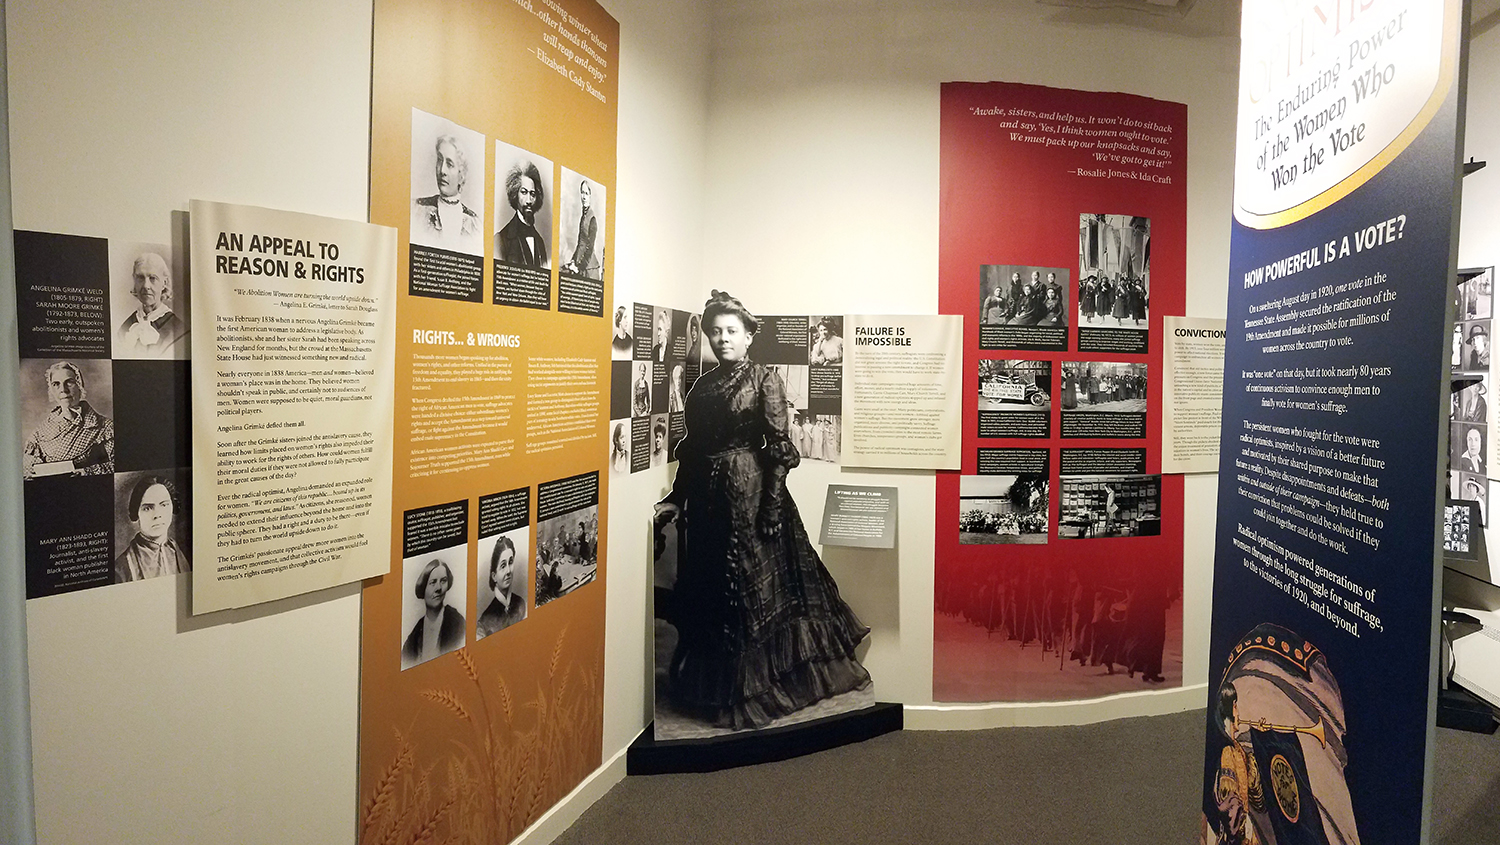 Panoramic image of entry to exhibit room. Two of the three sides of the exhibit are visible, with a portion of the entry panel on the right.